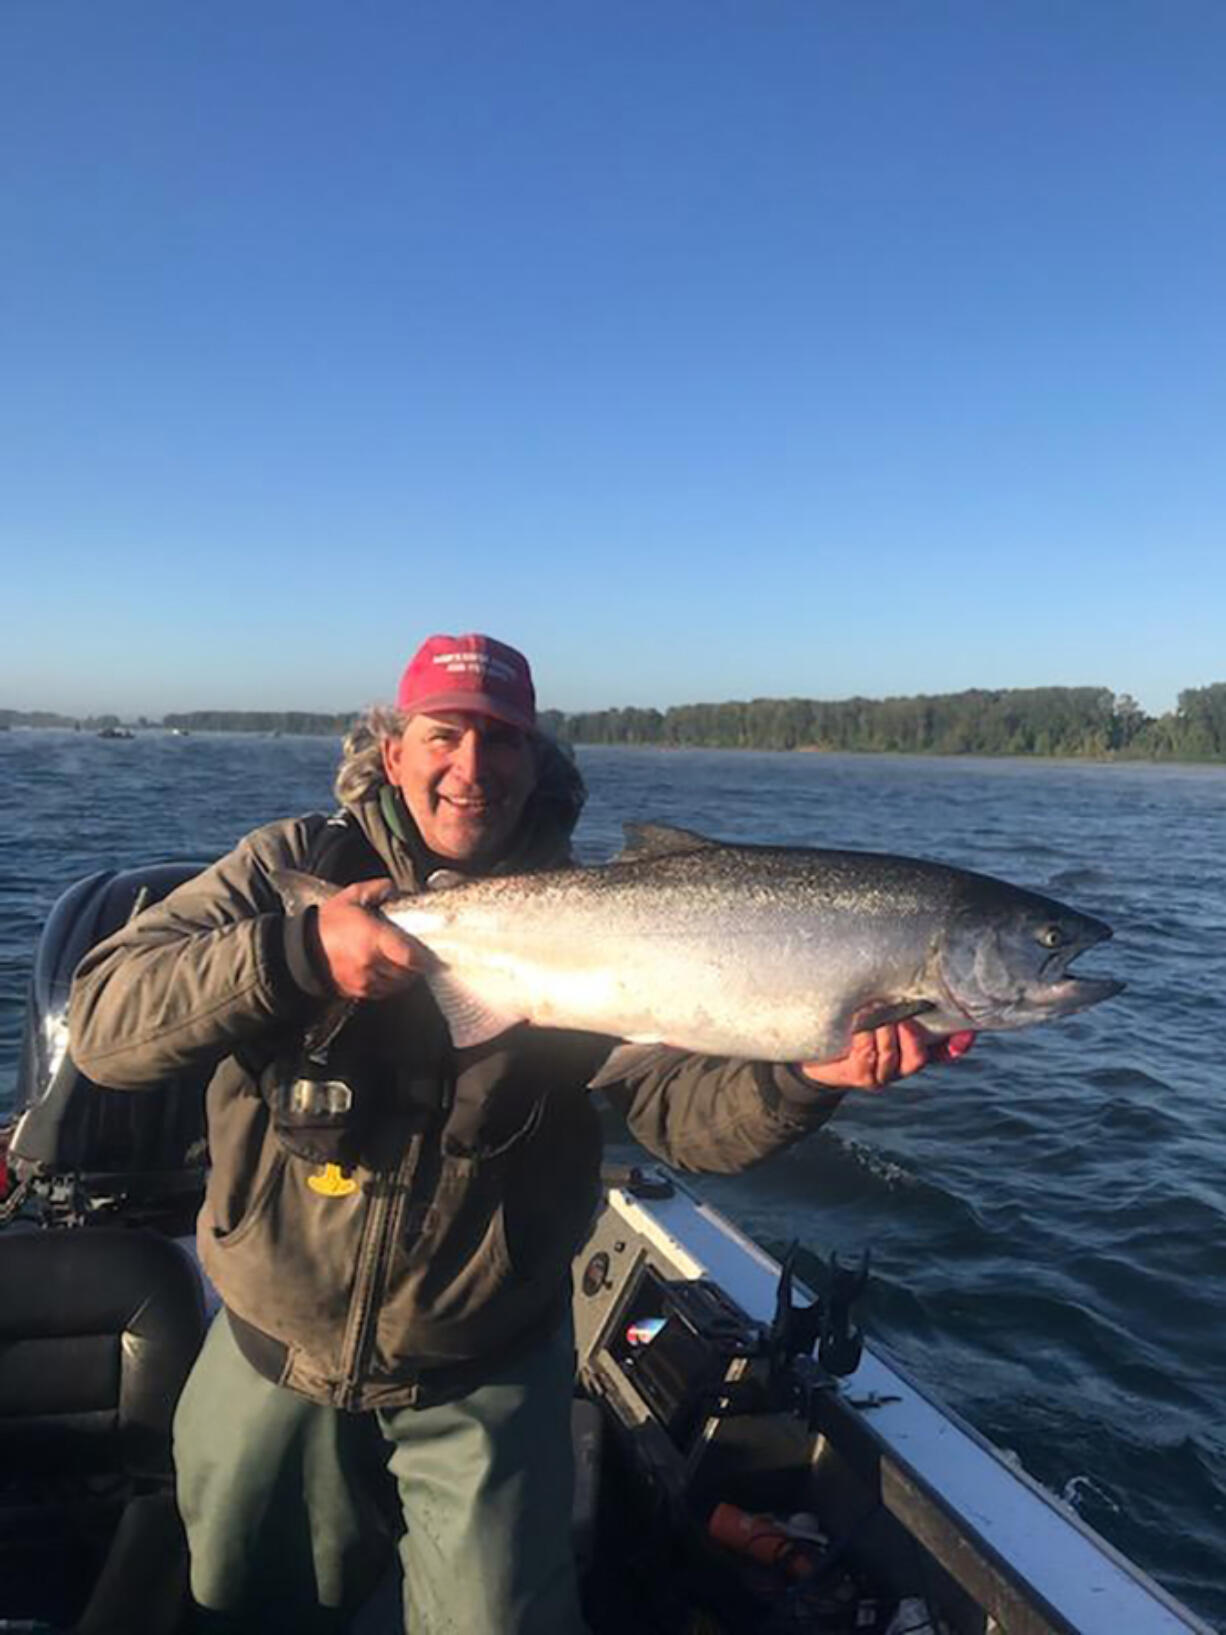 The Columbia River has been closed and reopened for Chinook fishing frequently this year. When it has been open anglers are catching lots of fine Chinook like this one taken with Dave's Guide Service.